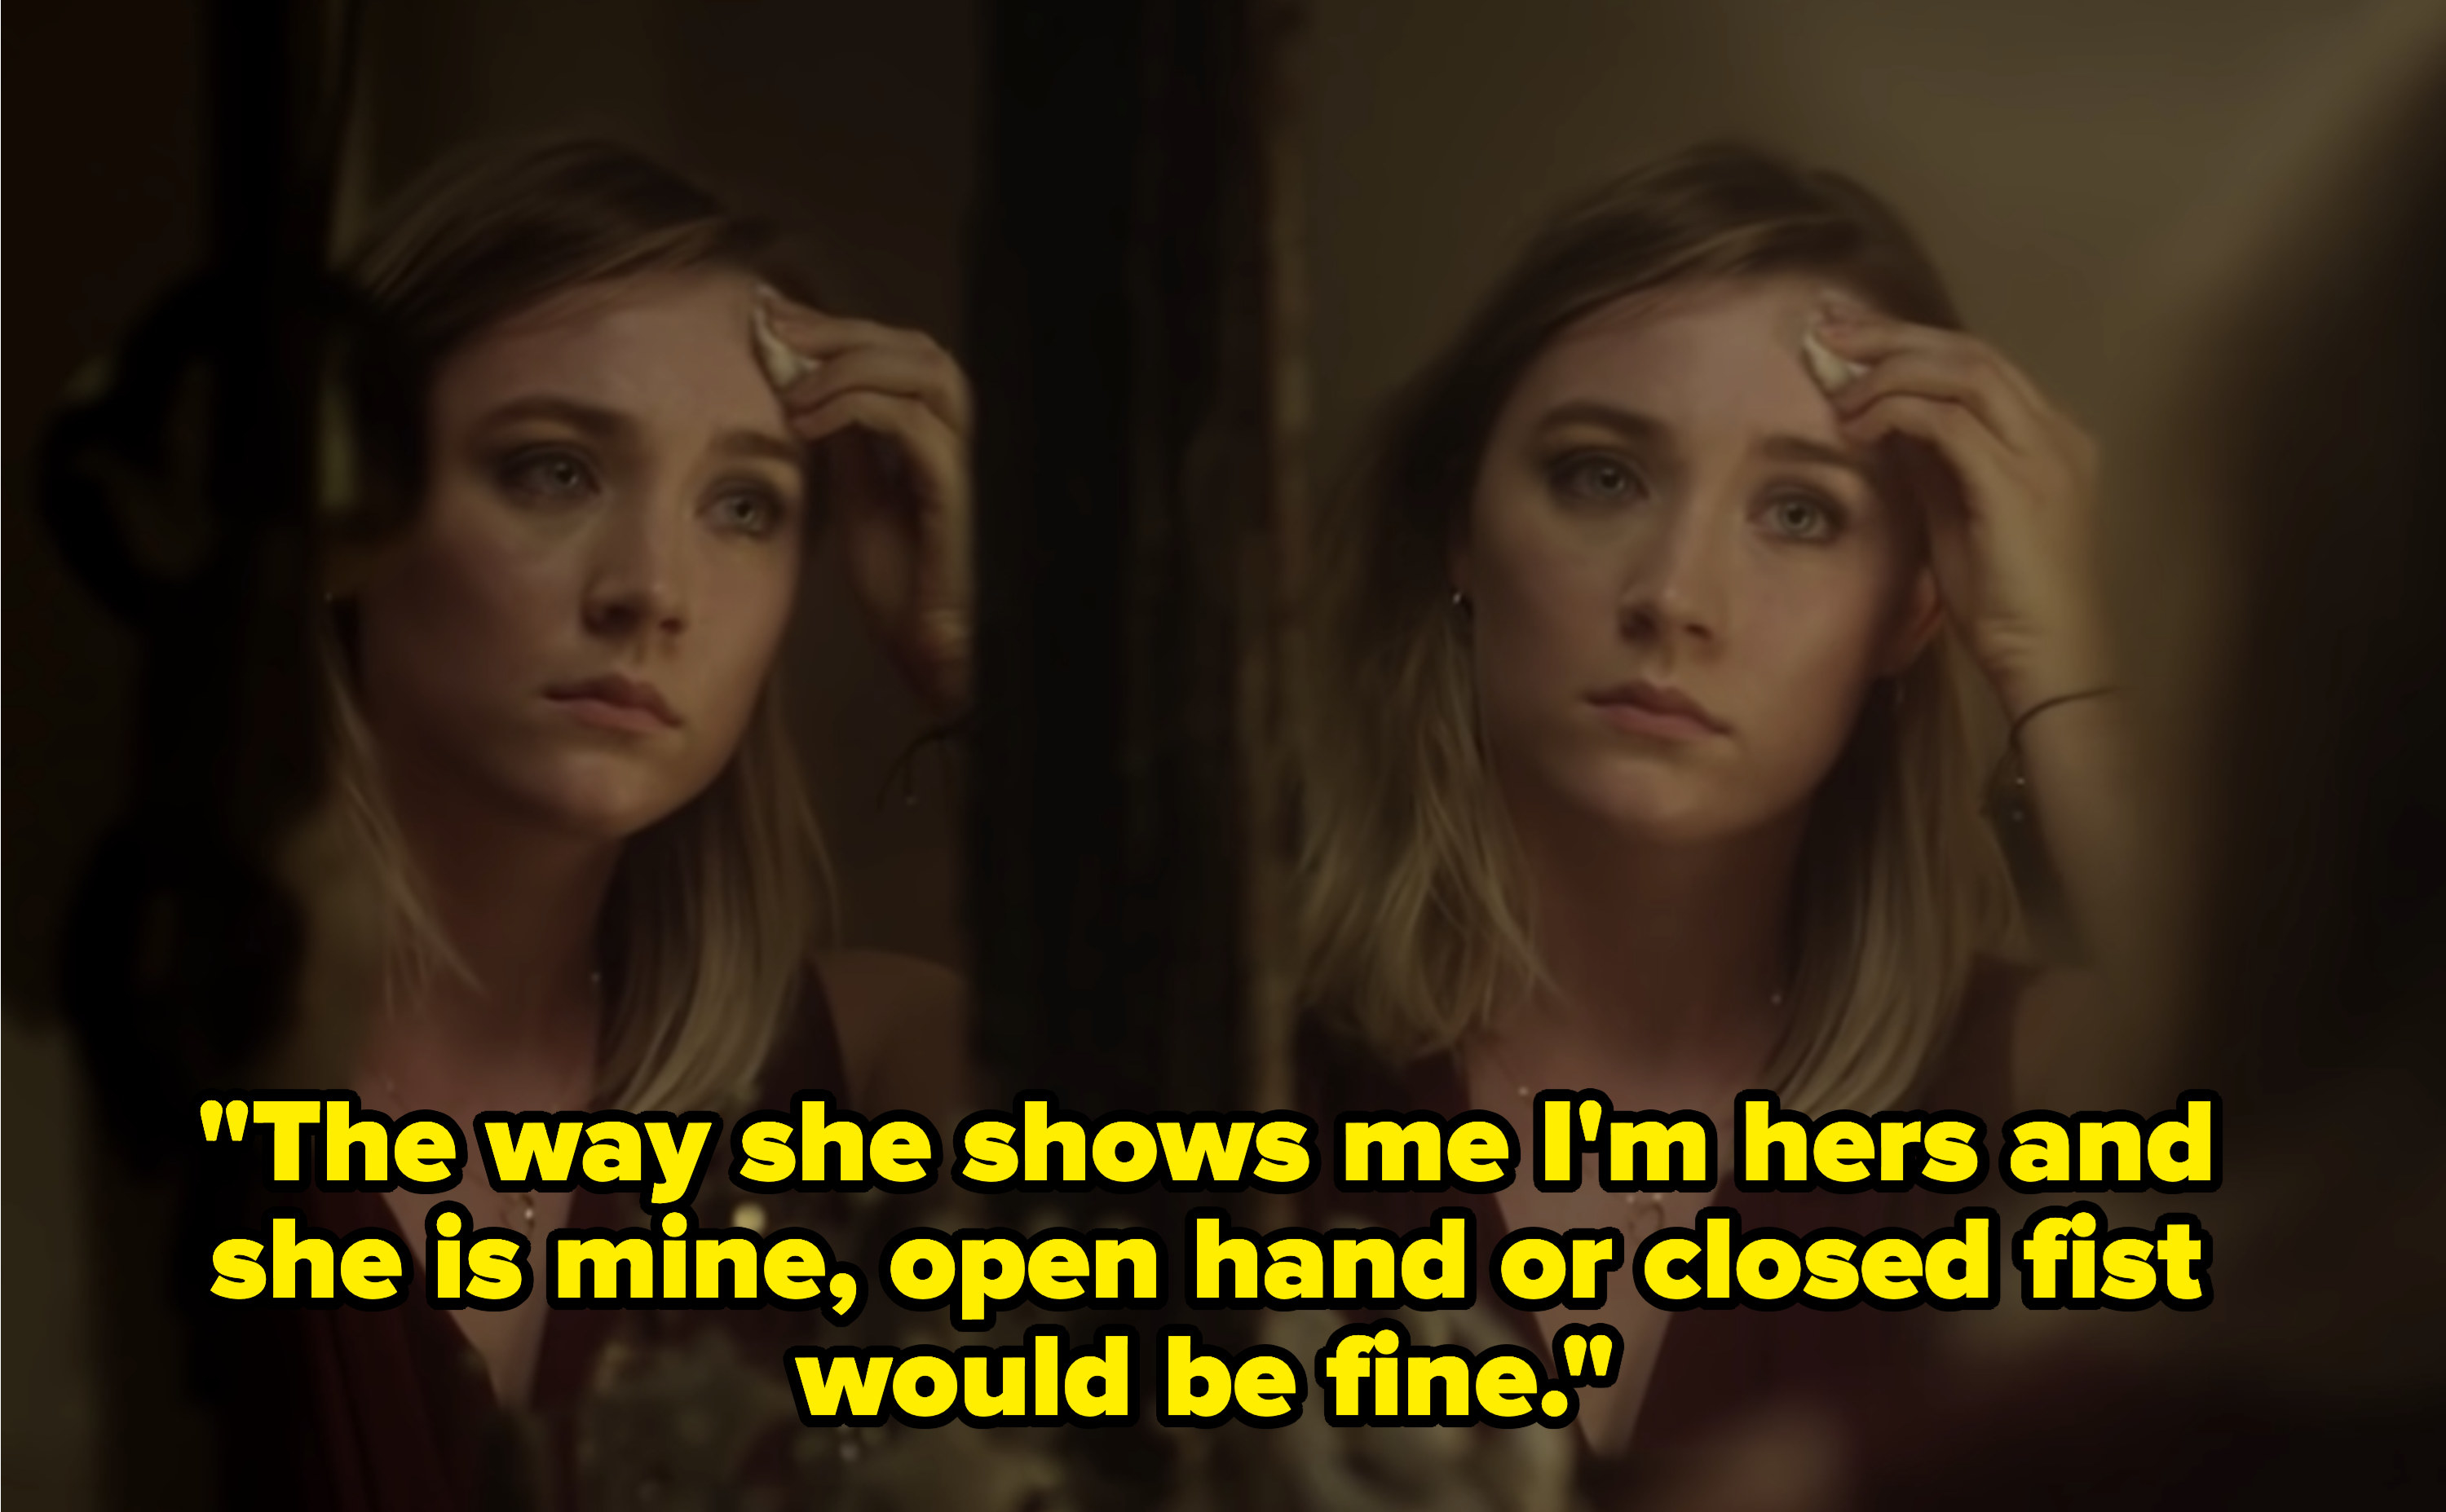 Saoirse Ronan wiping her face and the lyrics, &quot;The way she shows me I&#x27;m hers and she is mine, open hand or closed fist would be fine&quot;